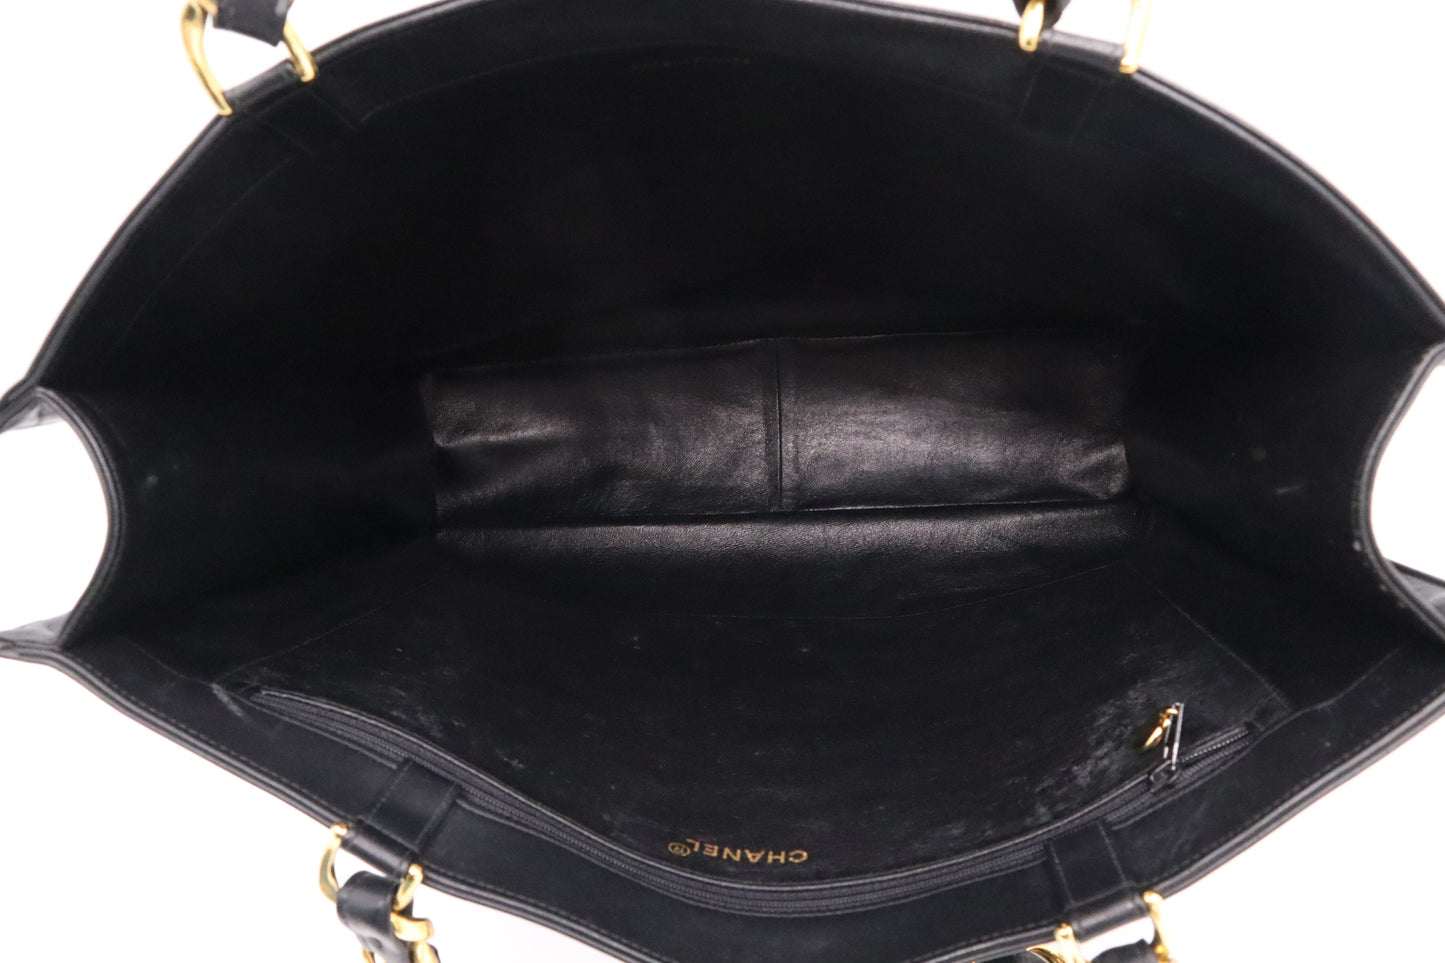 Chanel Large Chain Tote in Black Leather